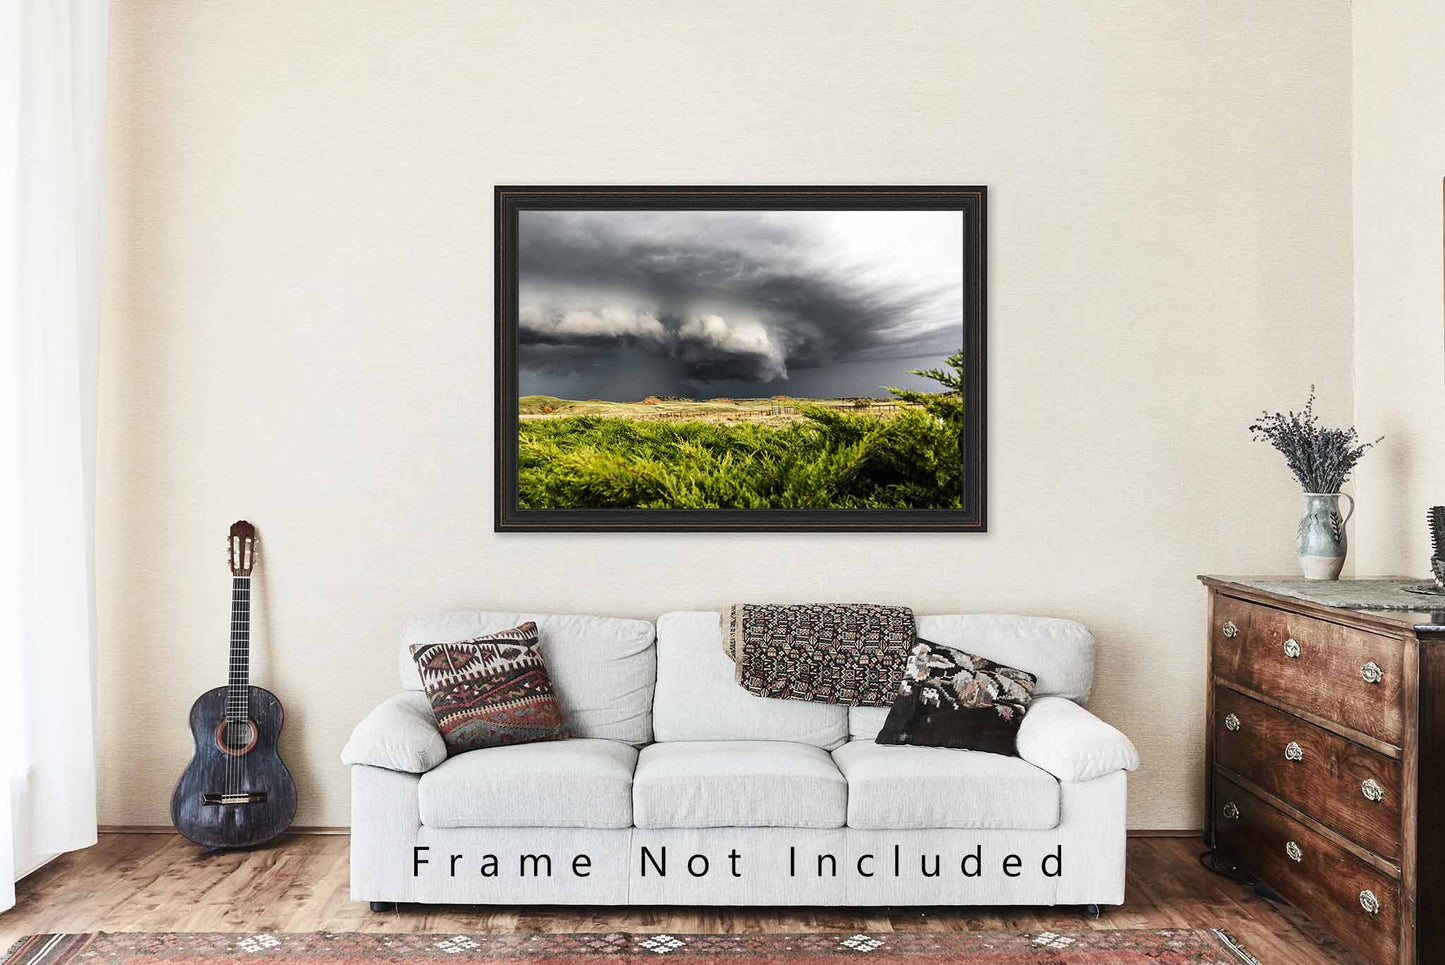 Storm Photography Print (Not Framed) Picture of Supercell Thunderstorm Over Cedar Bushes on Spring Day in Nebraska Prairie Wall Art Weather Decor